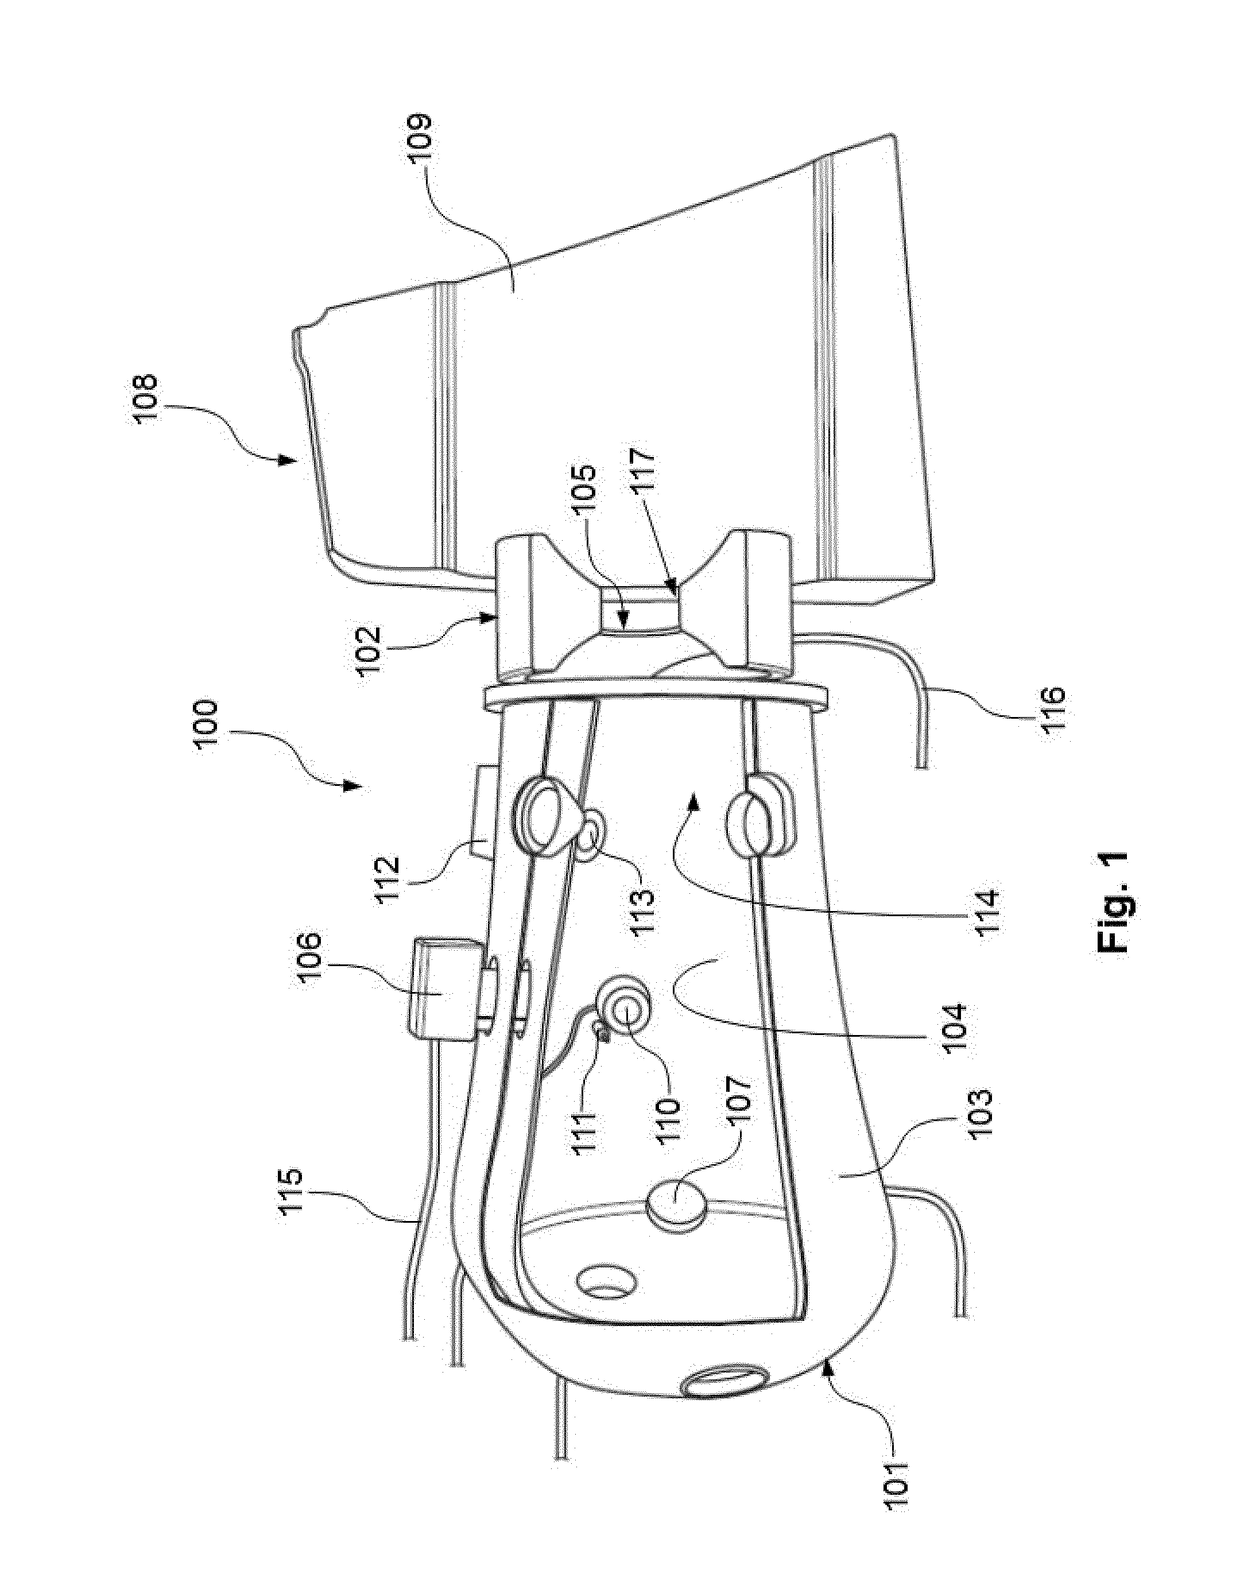 Device for simulating an endoscopic operation via natural orifice